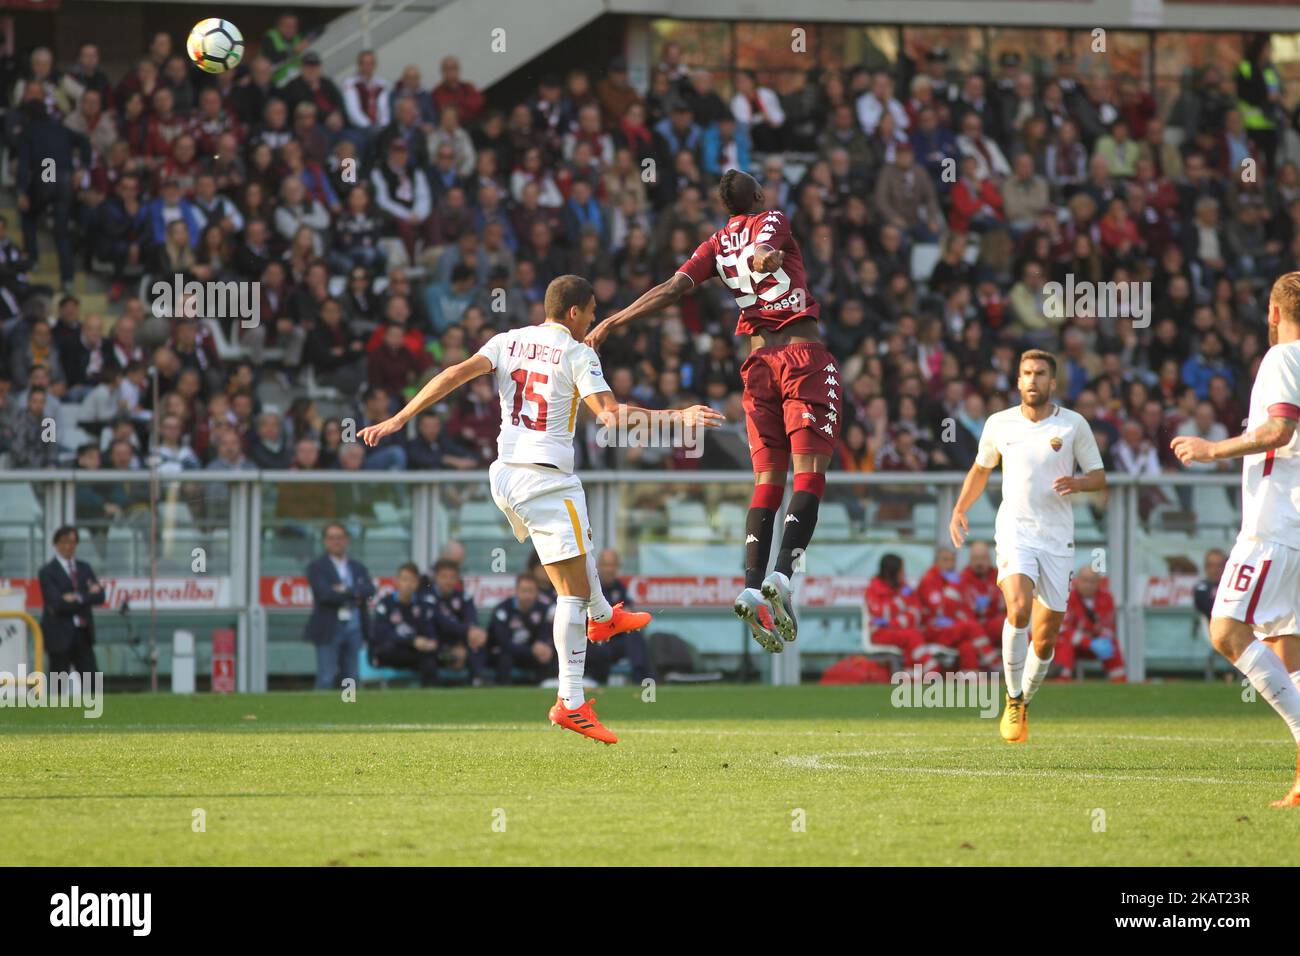 Umar Sadiq (Torino FC) and Hector Moreno (AS Roma) during the Serie A football match between Torino FC and AS Roma at Olympic Grande Torino Stadium on 22 October, 2017 in Turin, Italy. (Photo by Massimiliano Ferraro/NurPhoto) Stock Photo